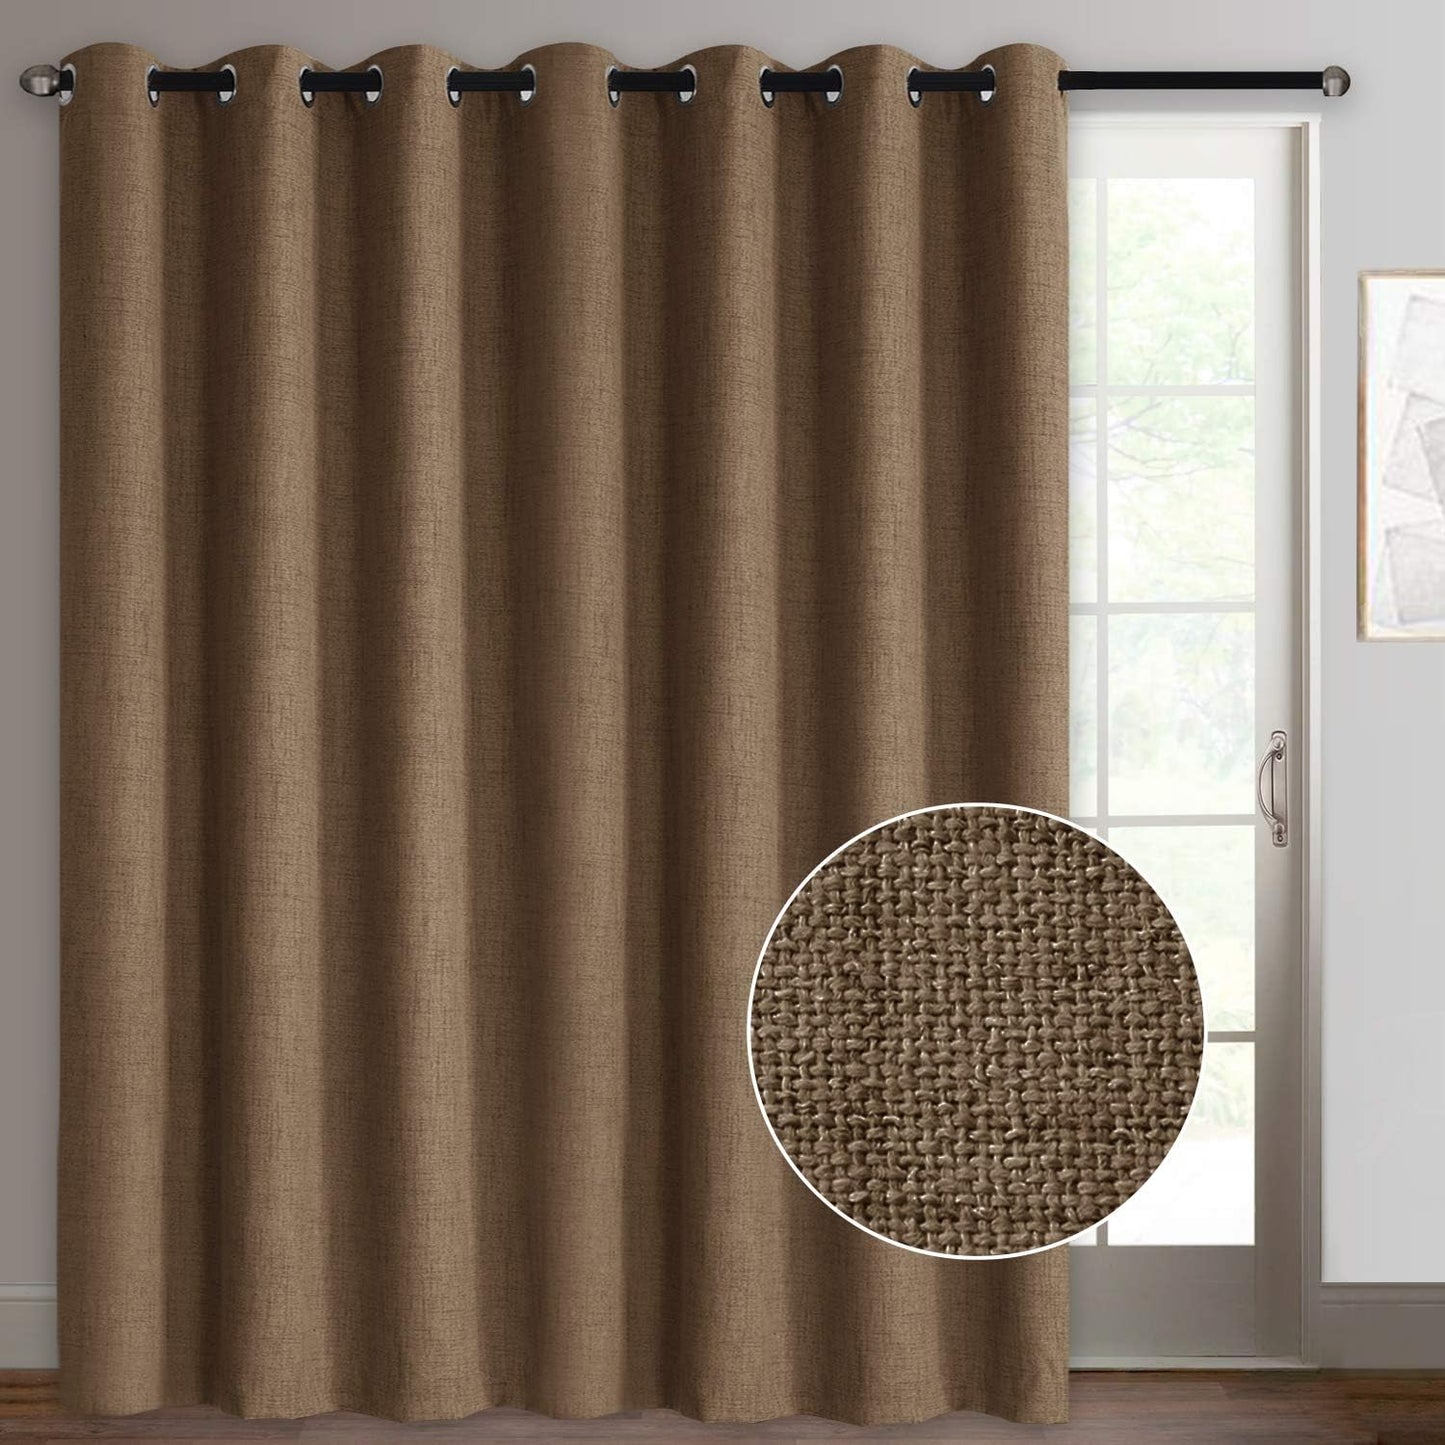 Rose Home Fashion Sliding Door Curtains, Primitive Linen Look 100% Blackout Curtains, Thermal Insulated Patio Door Curtains-1 Panel (W100 X L84, Grey)  Rose Home Fashion Chocolate W100 X L96|1 Panel 